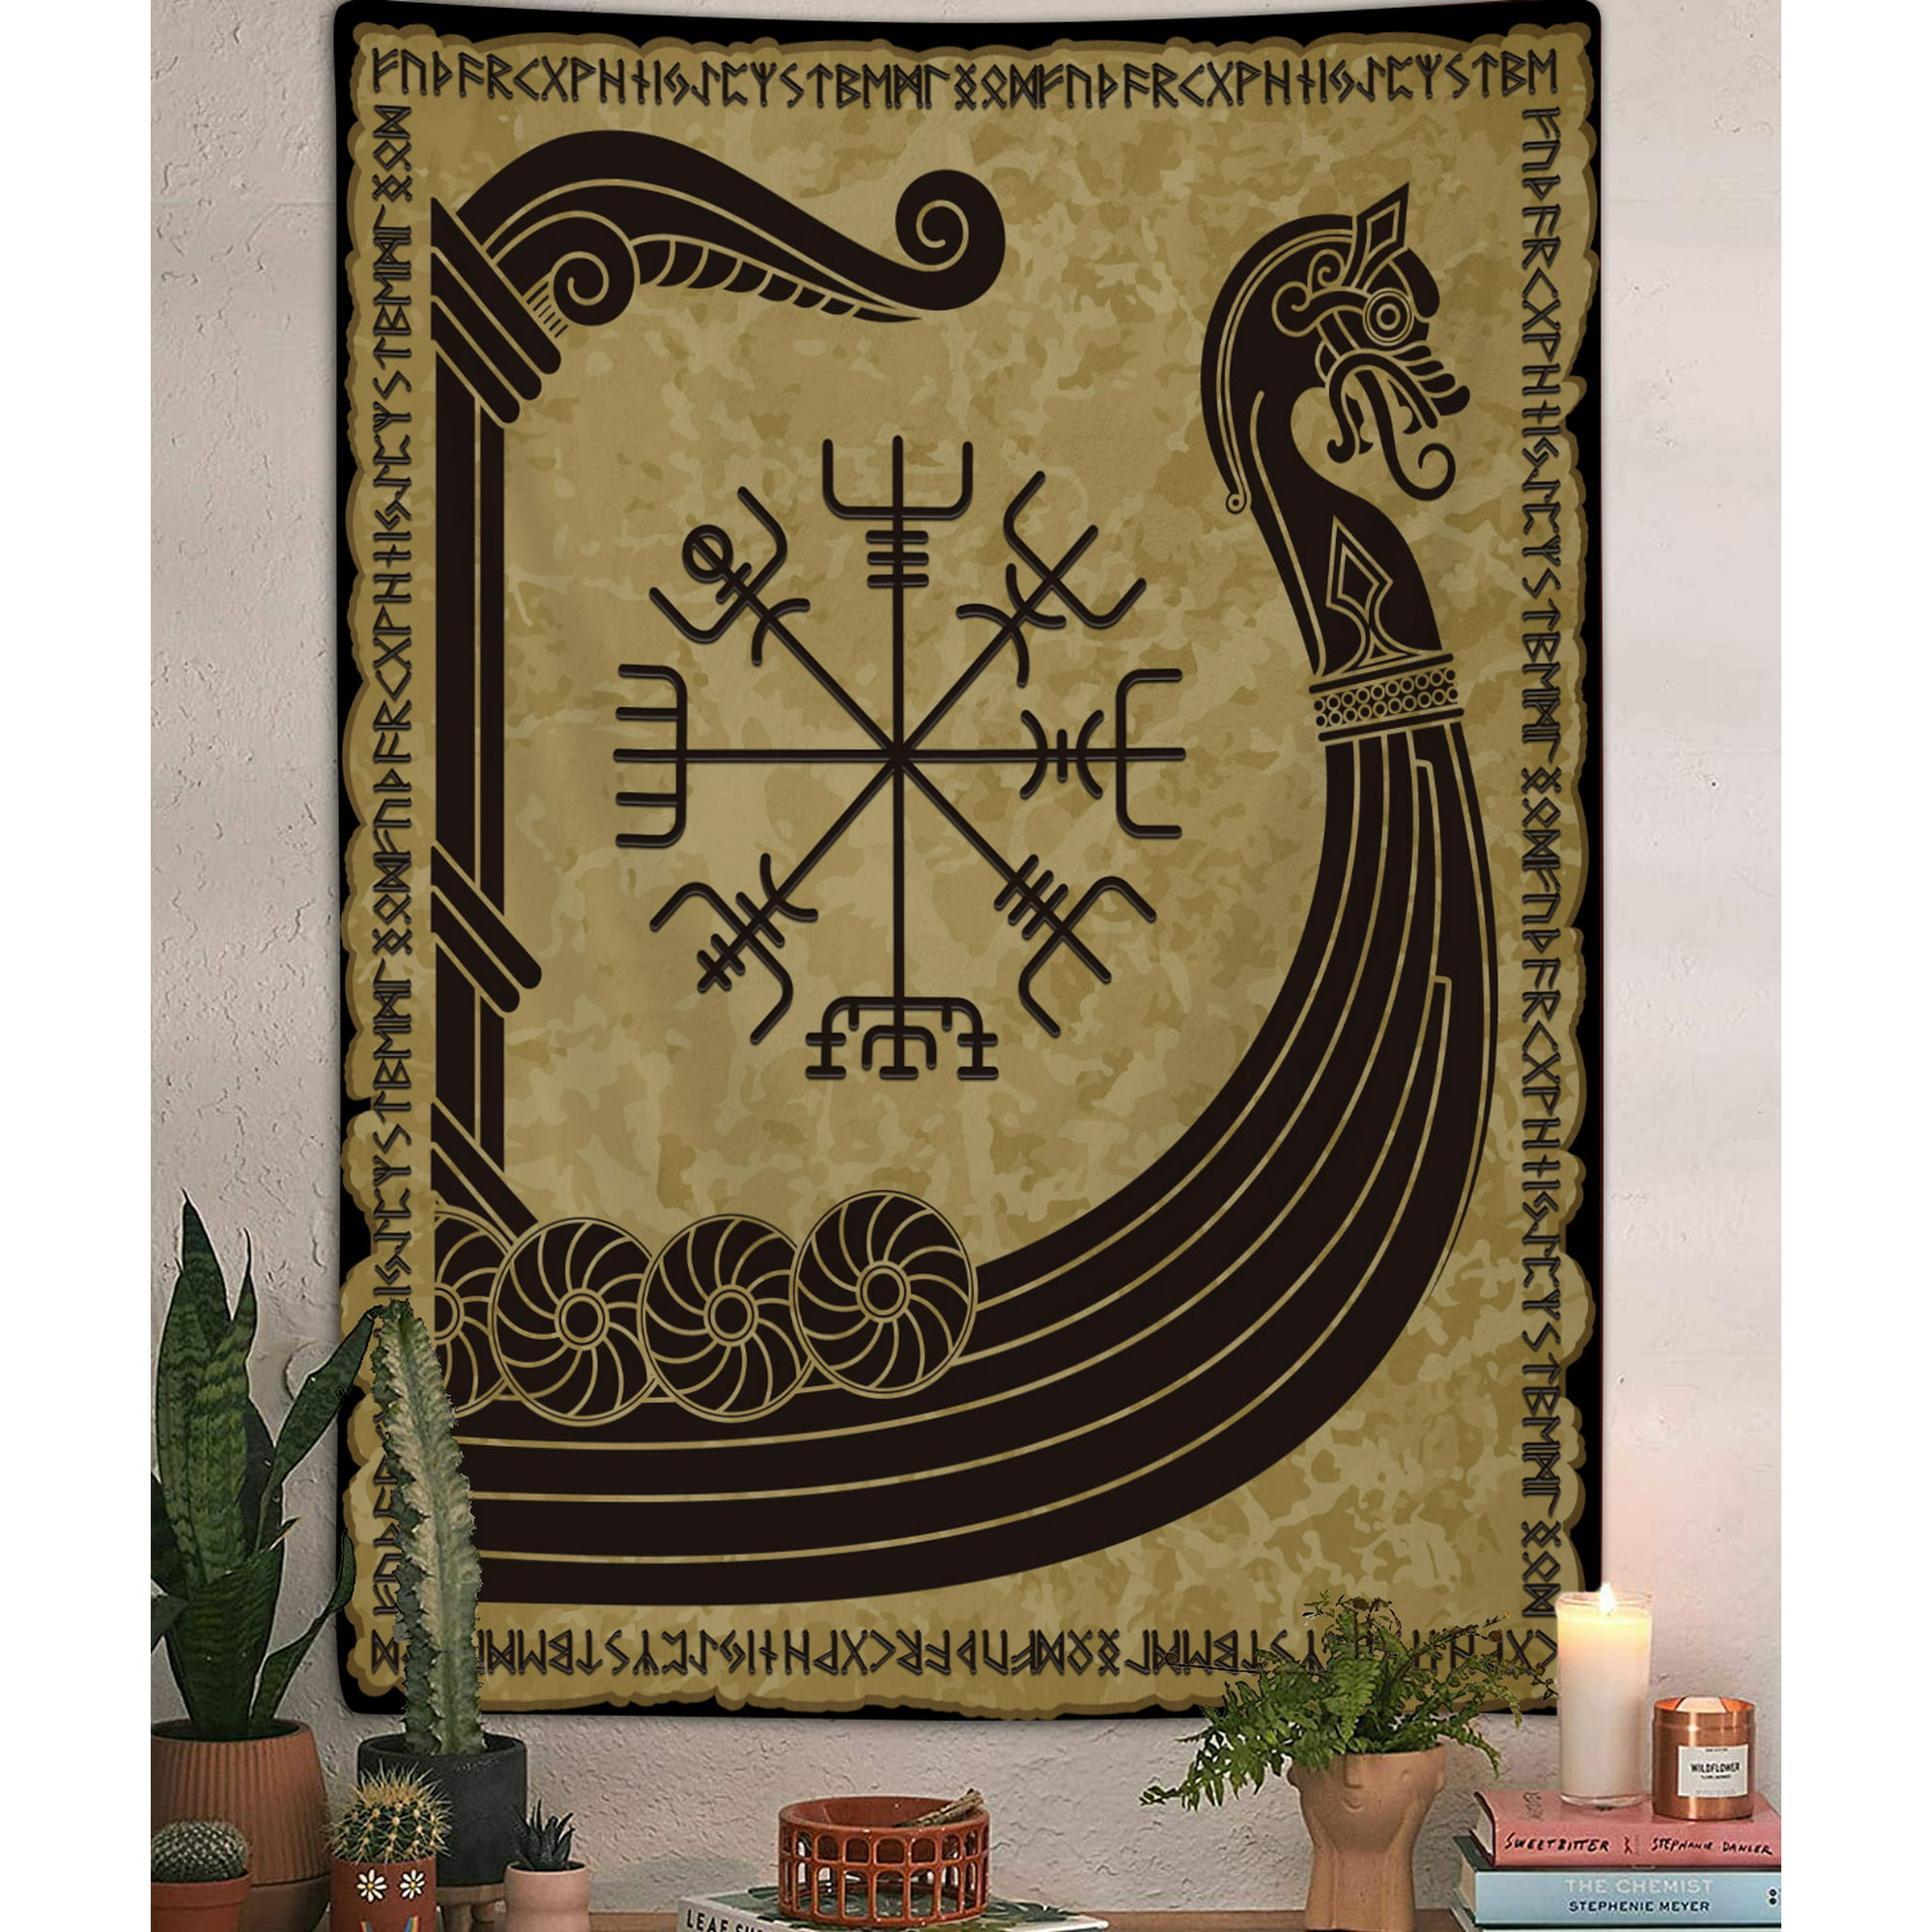 Springboard Drivkraft ordlyd Viking Norse Decor Tapestry, Cool Norwegian Mythology Nordic Pagan Totem  Tapestry Wall Hanging For Men Bedroom, Golden Tapestries Poster Blanket  College Dorm Home Decor 40X60Inches - Walmart.com